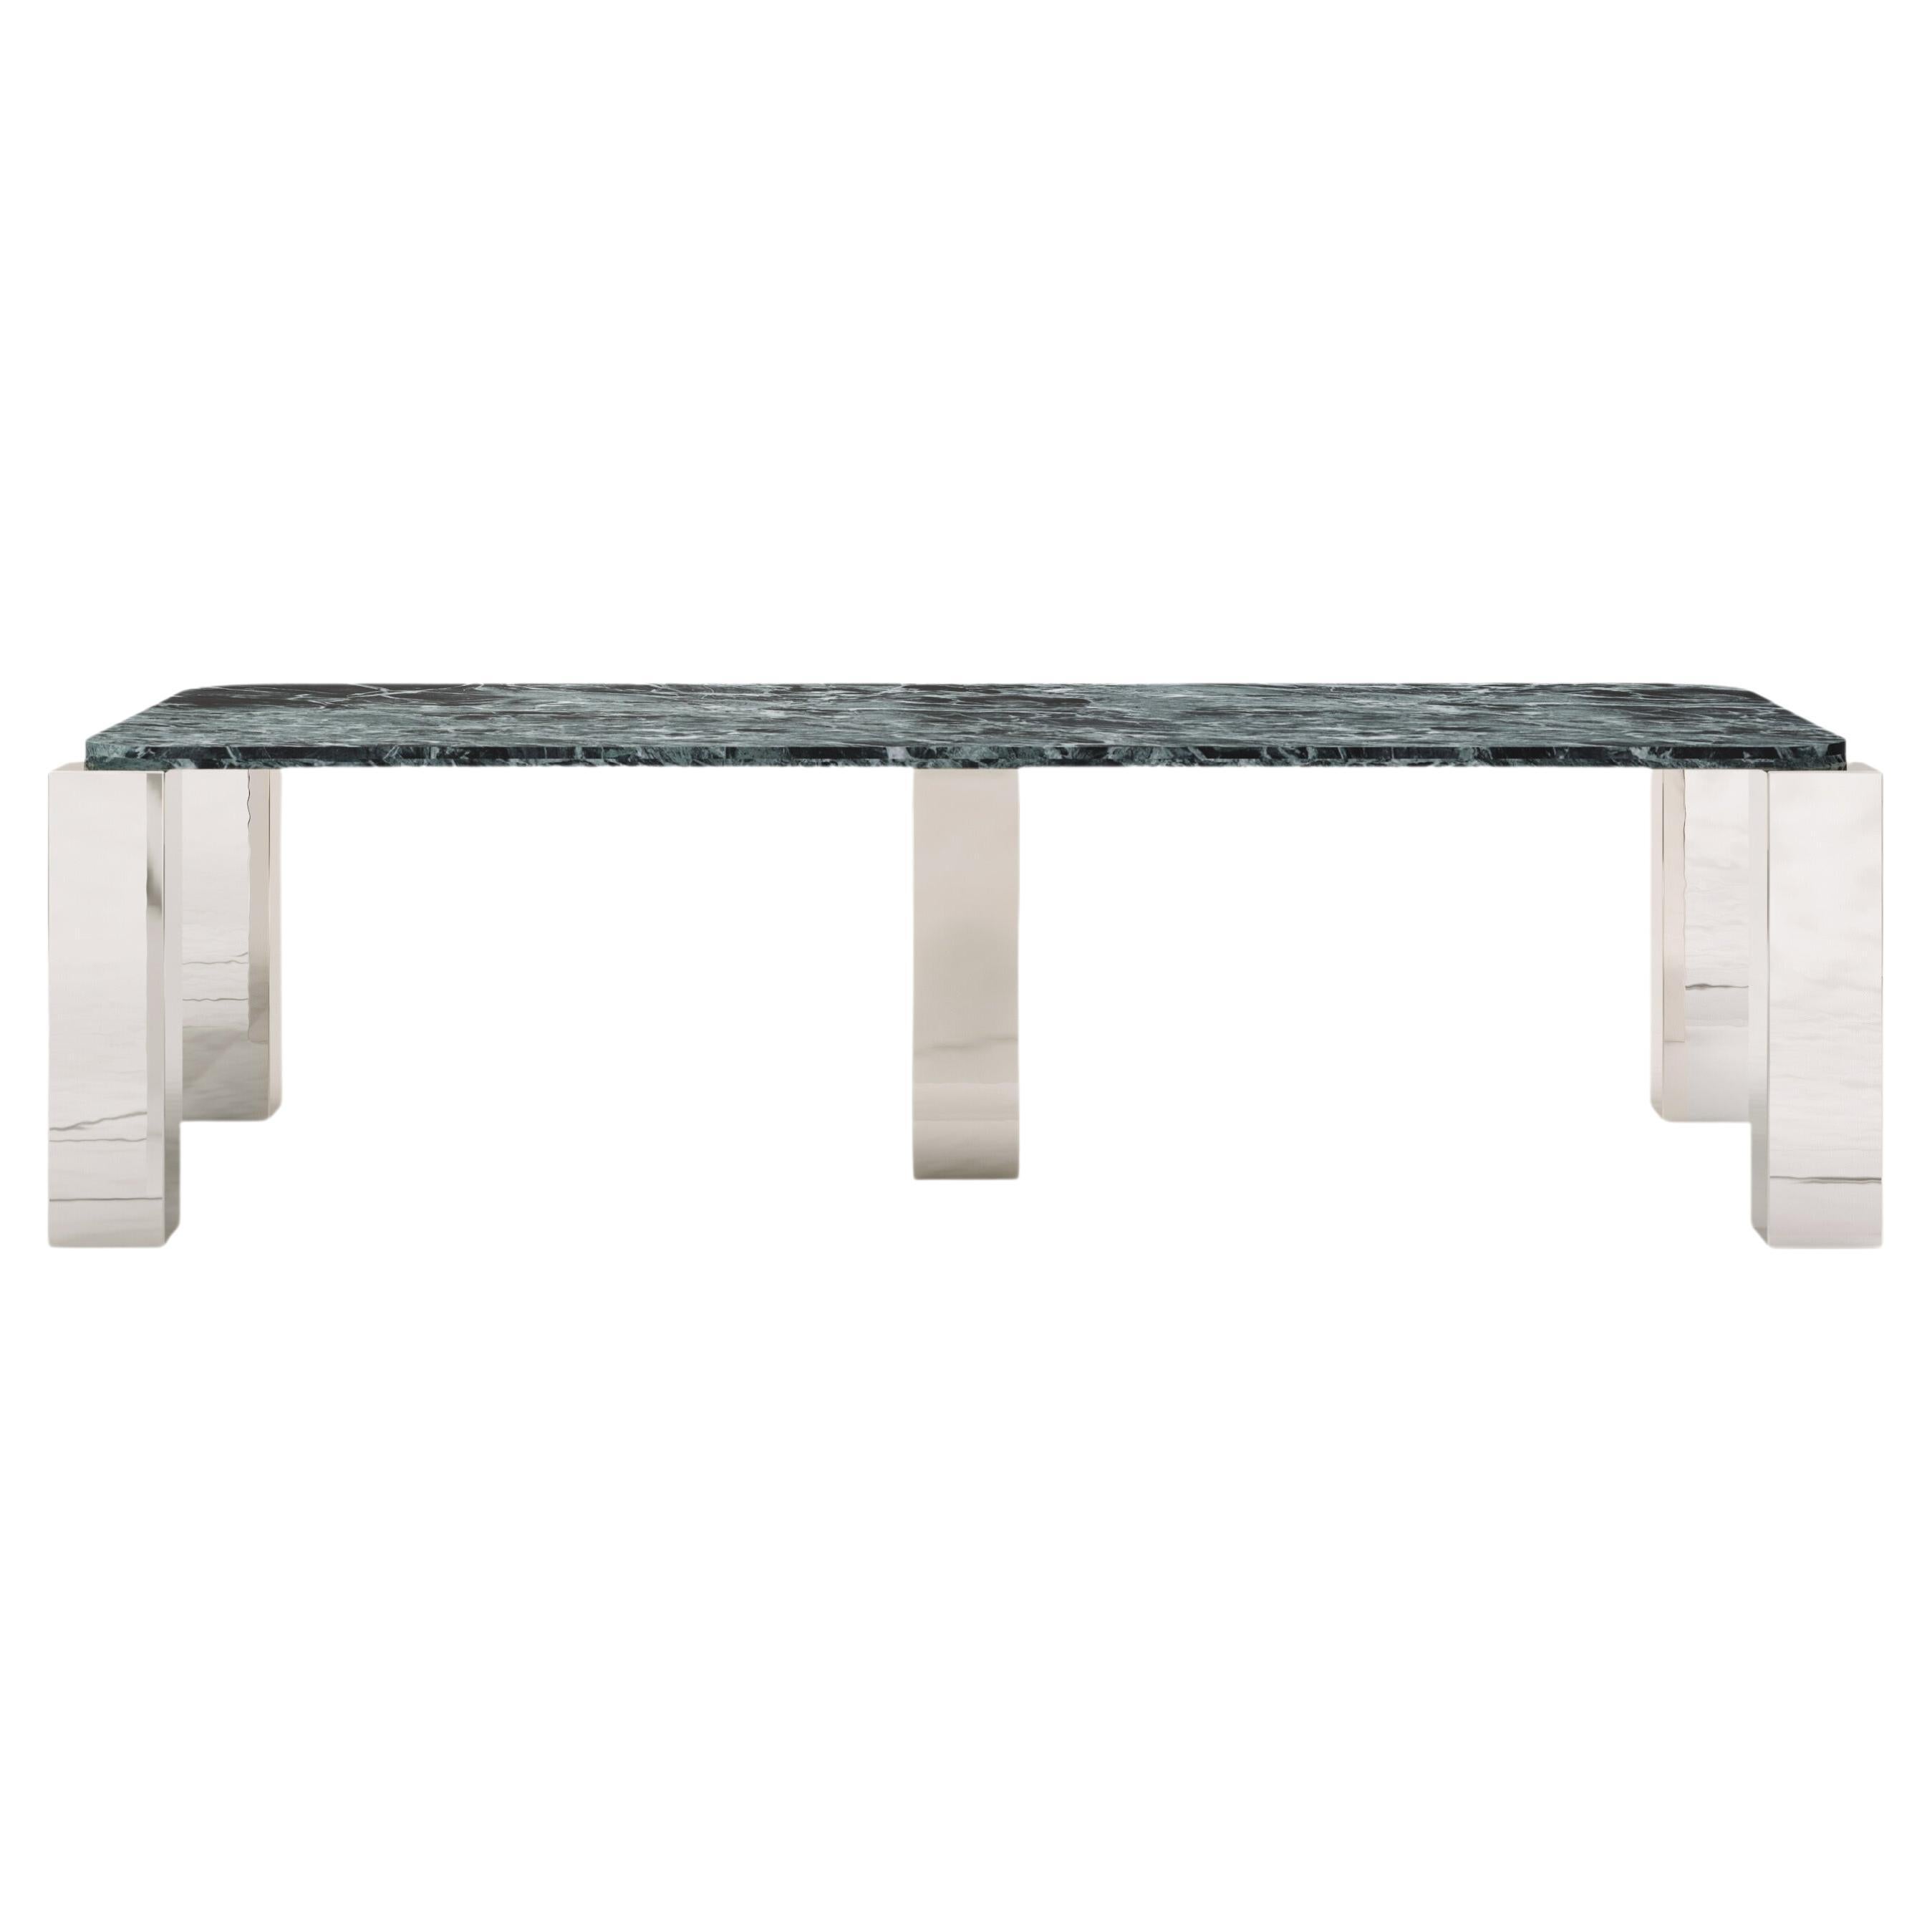 FORM(LA) Cubo Rectangle Dining Table 110”L x 50”W x 30”H Verde Marble & Chrome For Sale